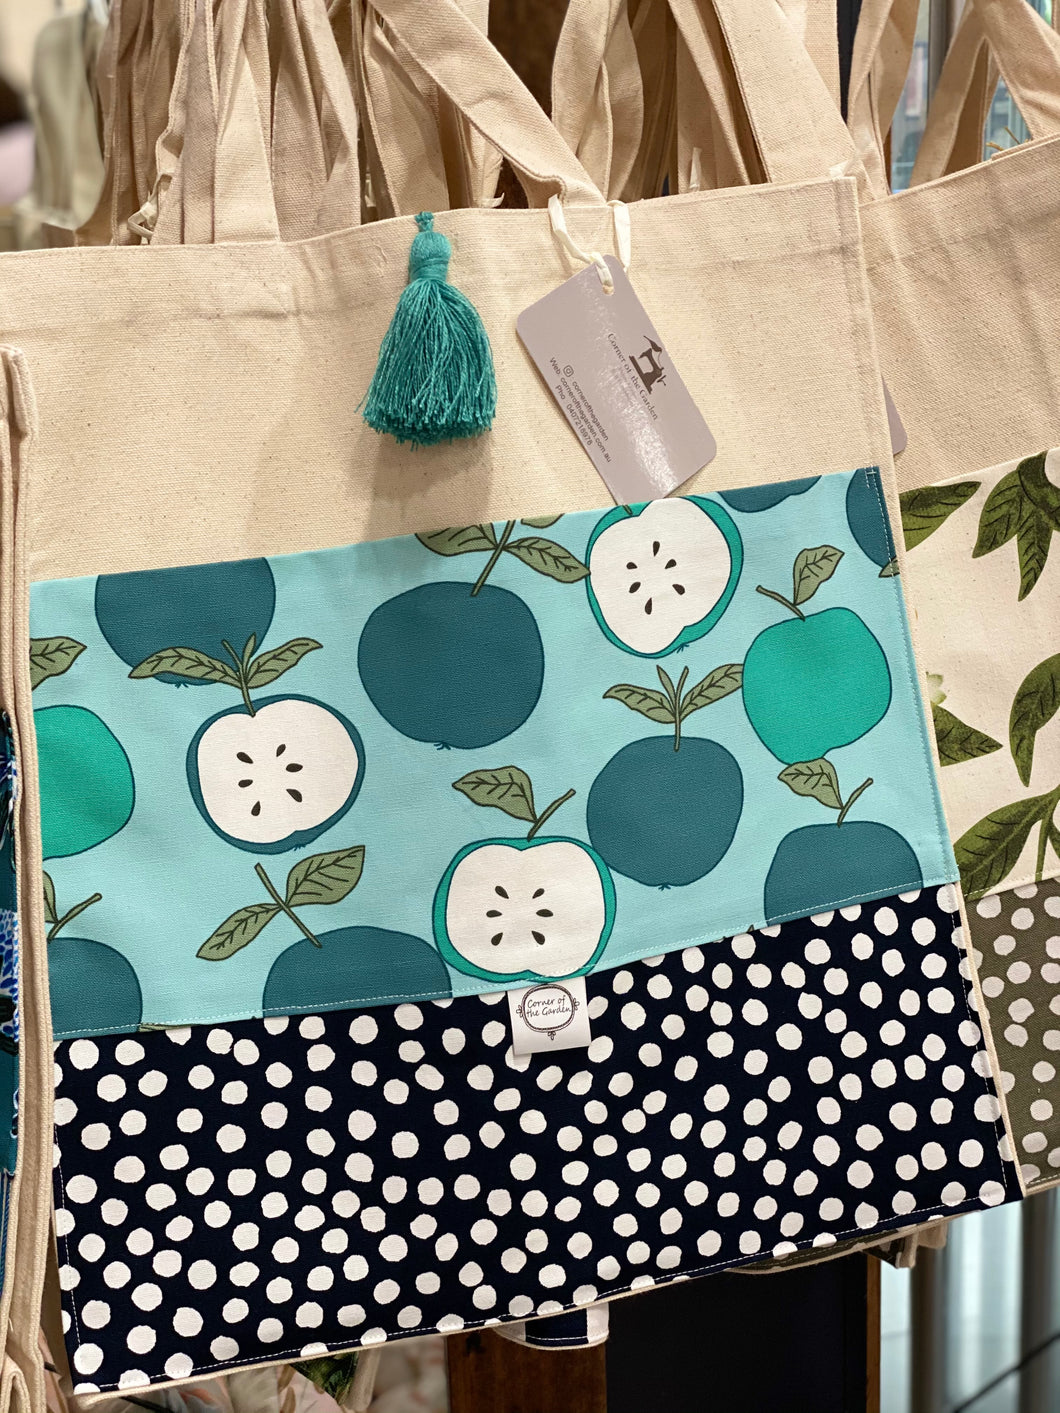 Ample Apples Shopping Totes